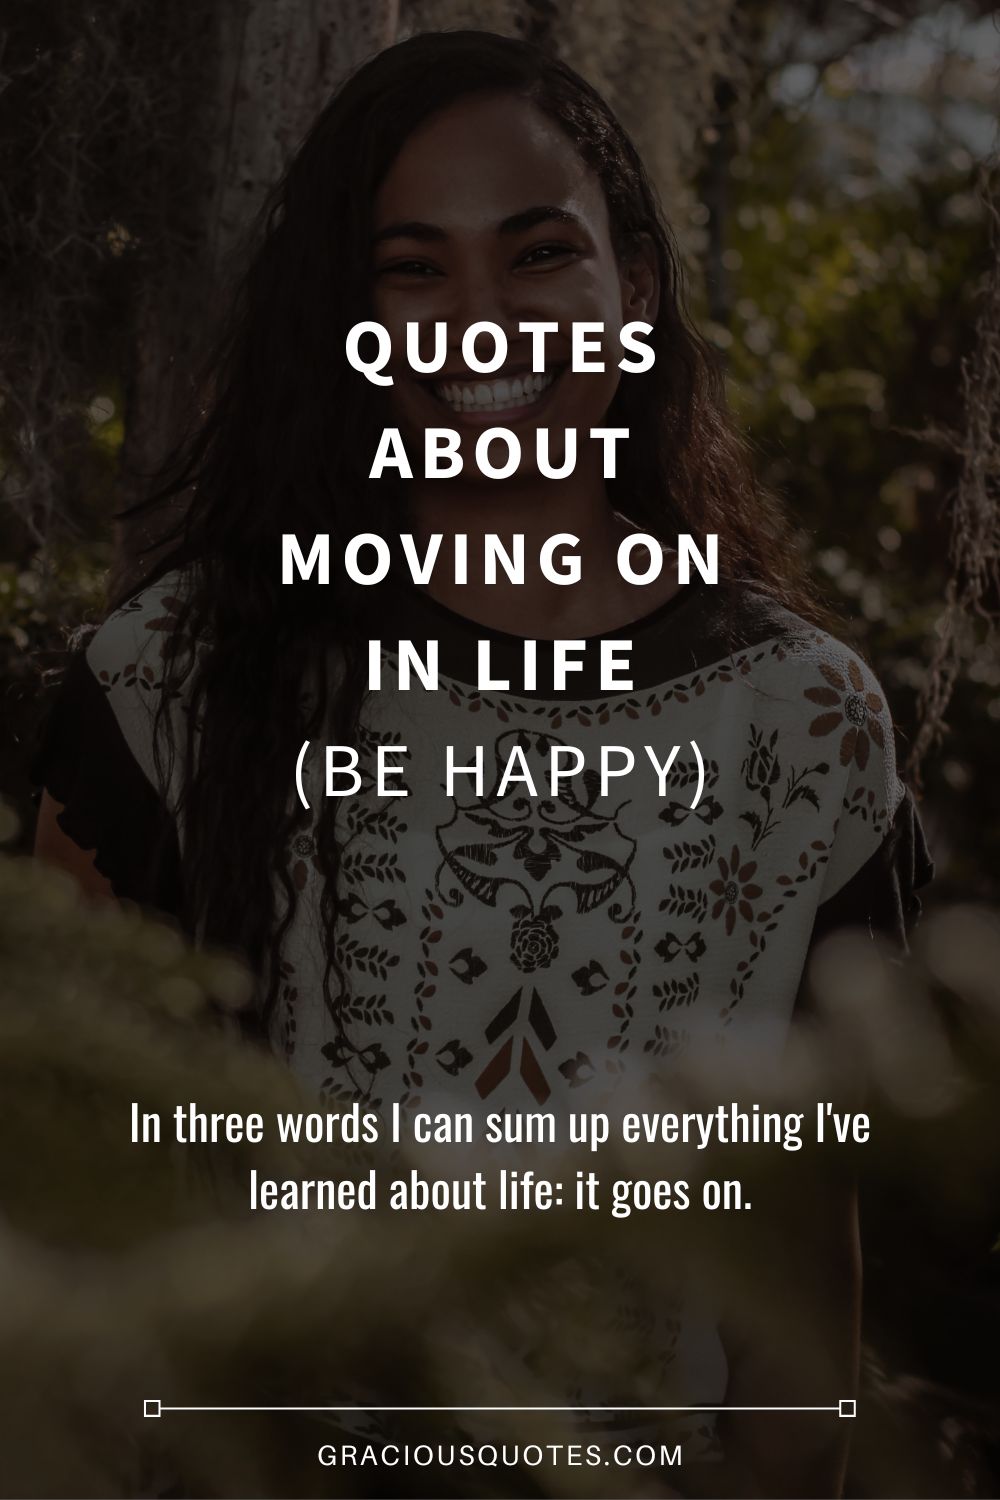 Top 80 Quotes About Moving On In Life (Be Happy)